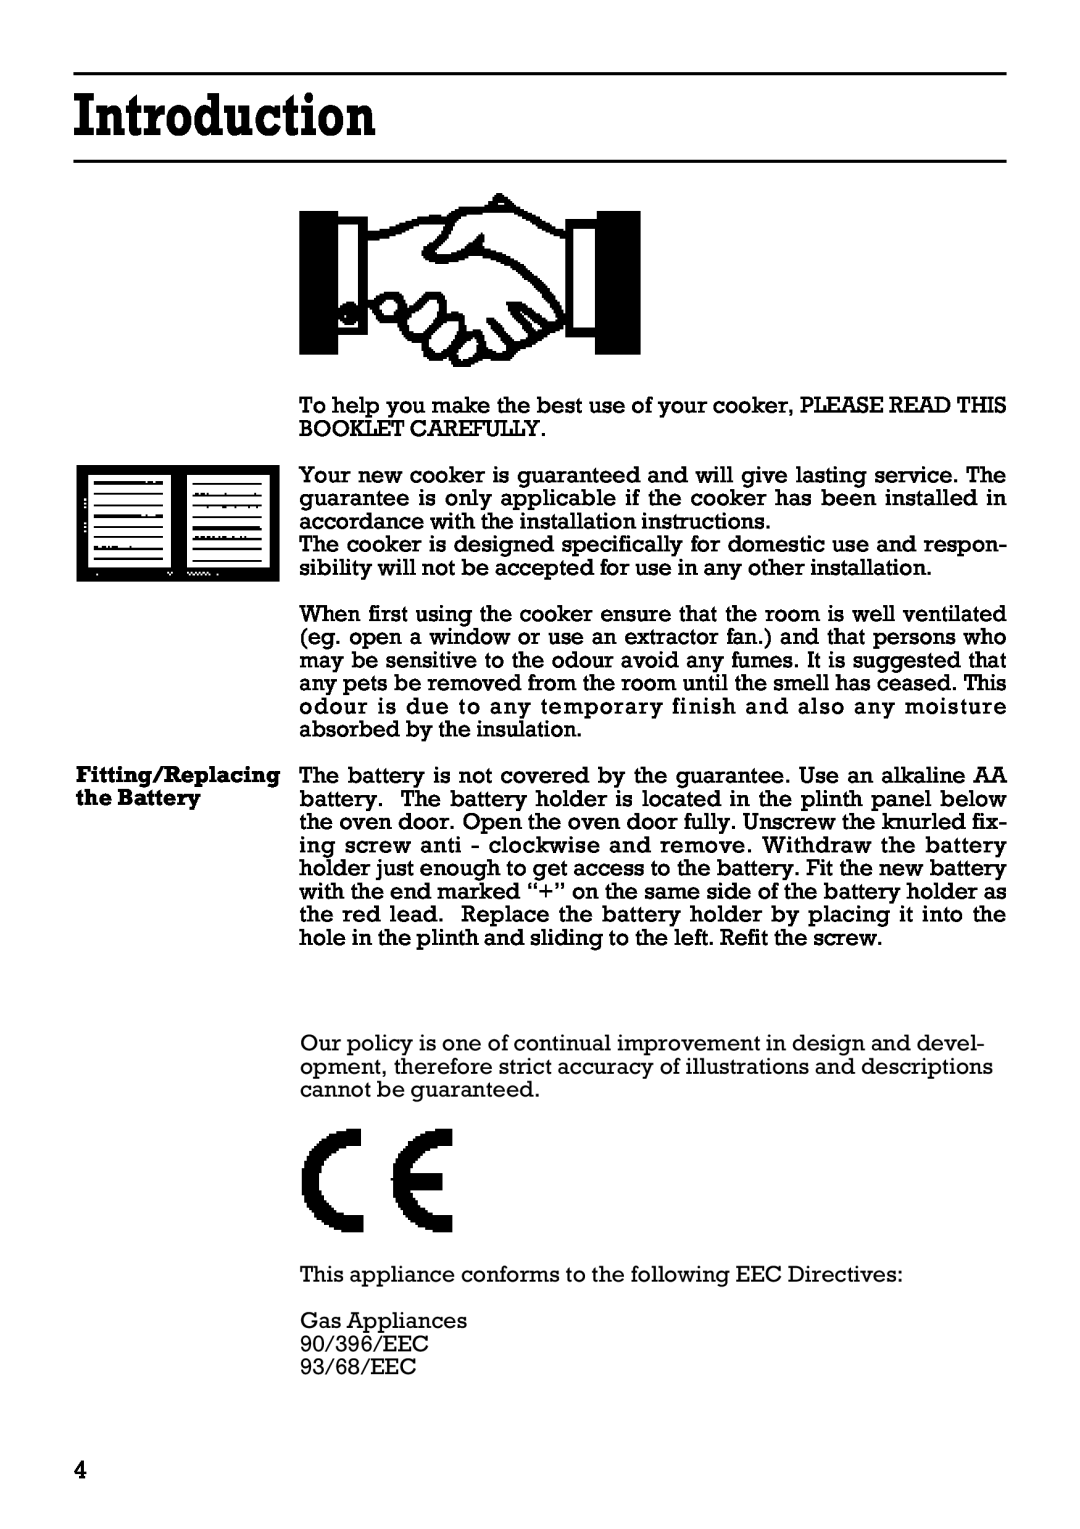 Creda 41202 installation instructions Introduction, Fitting/Replacing the Battery 